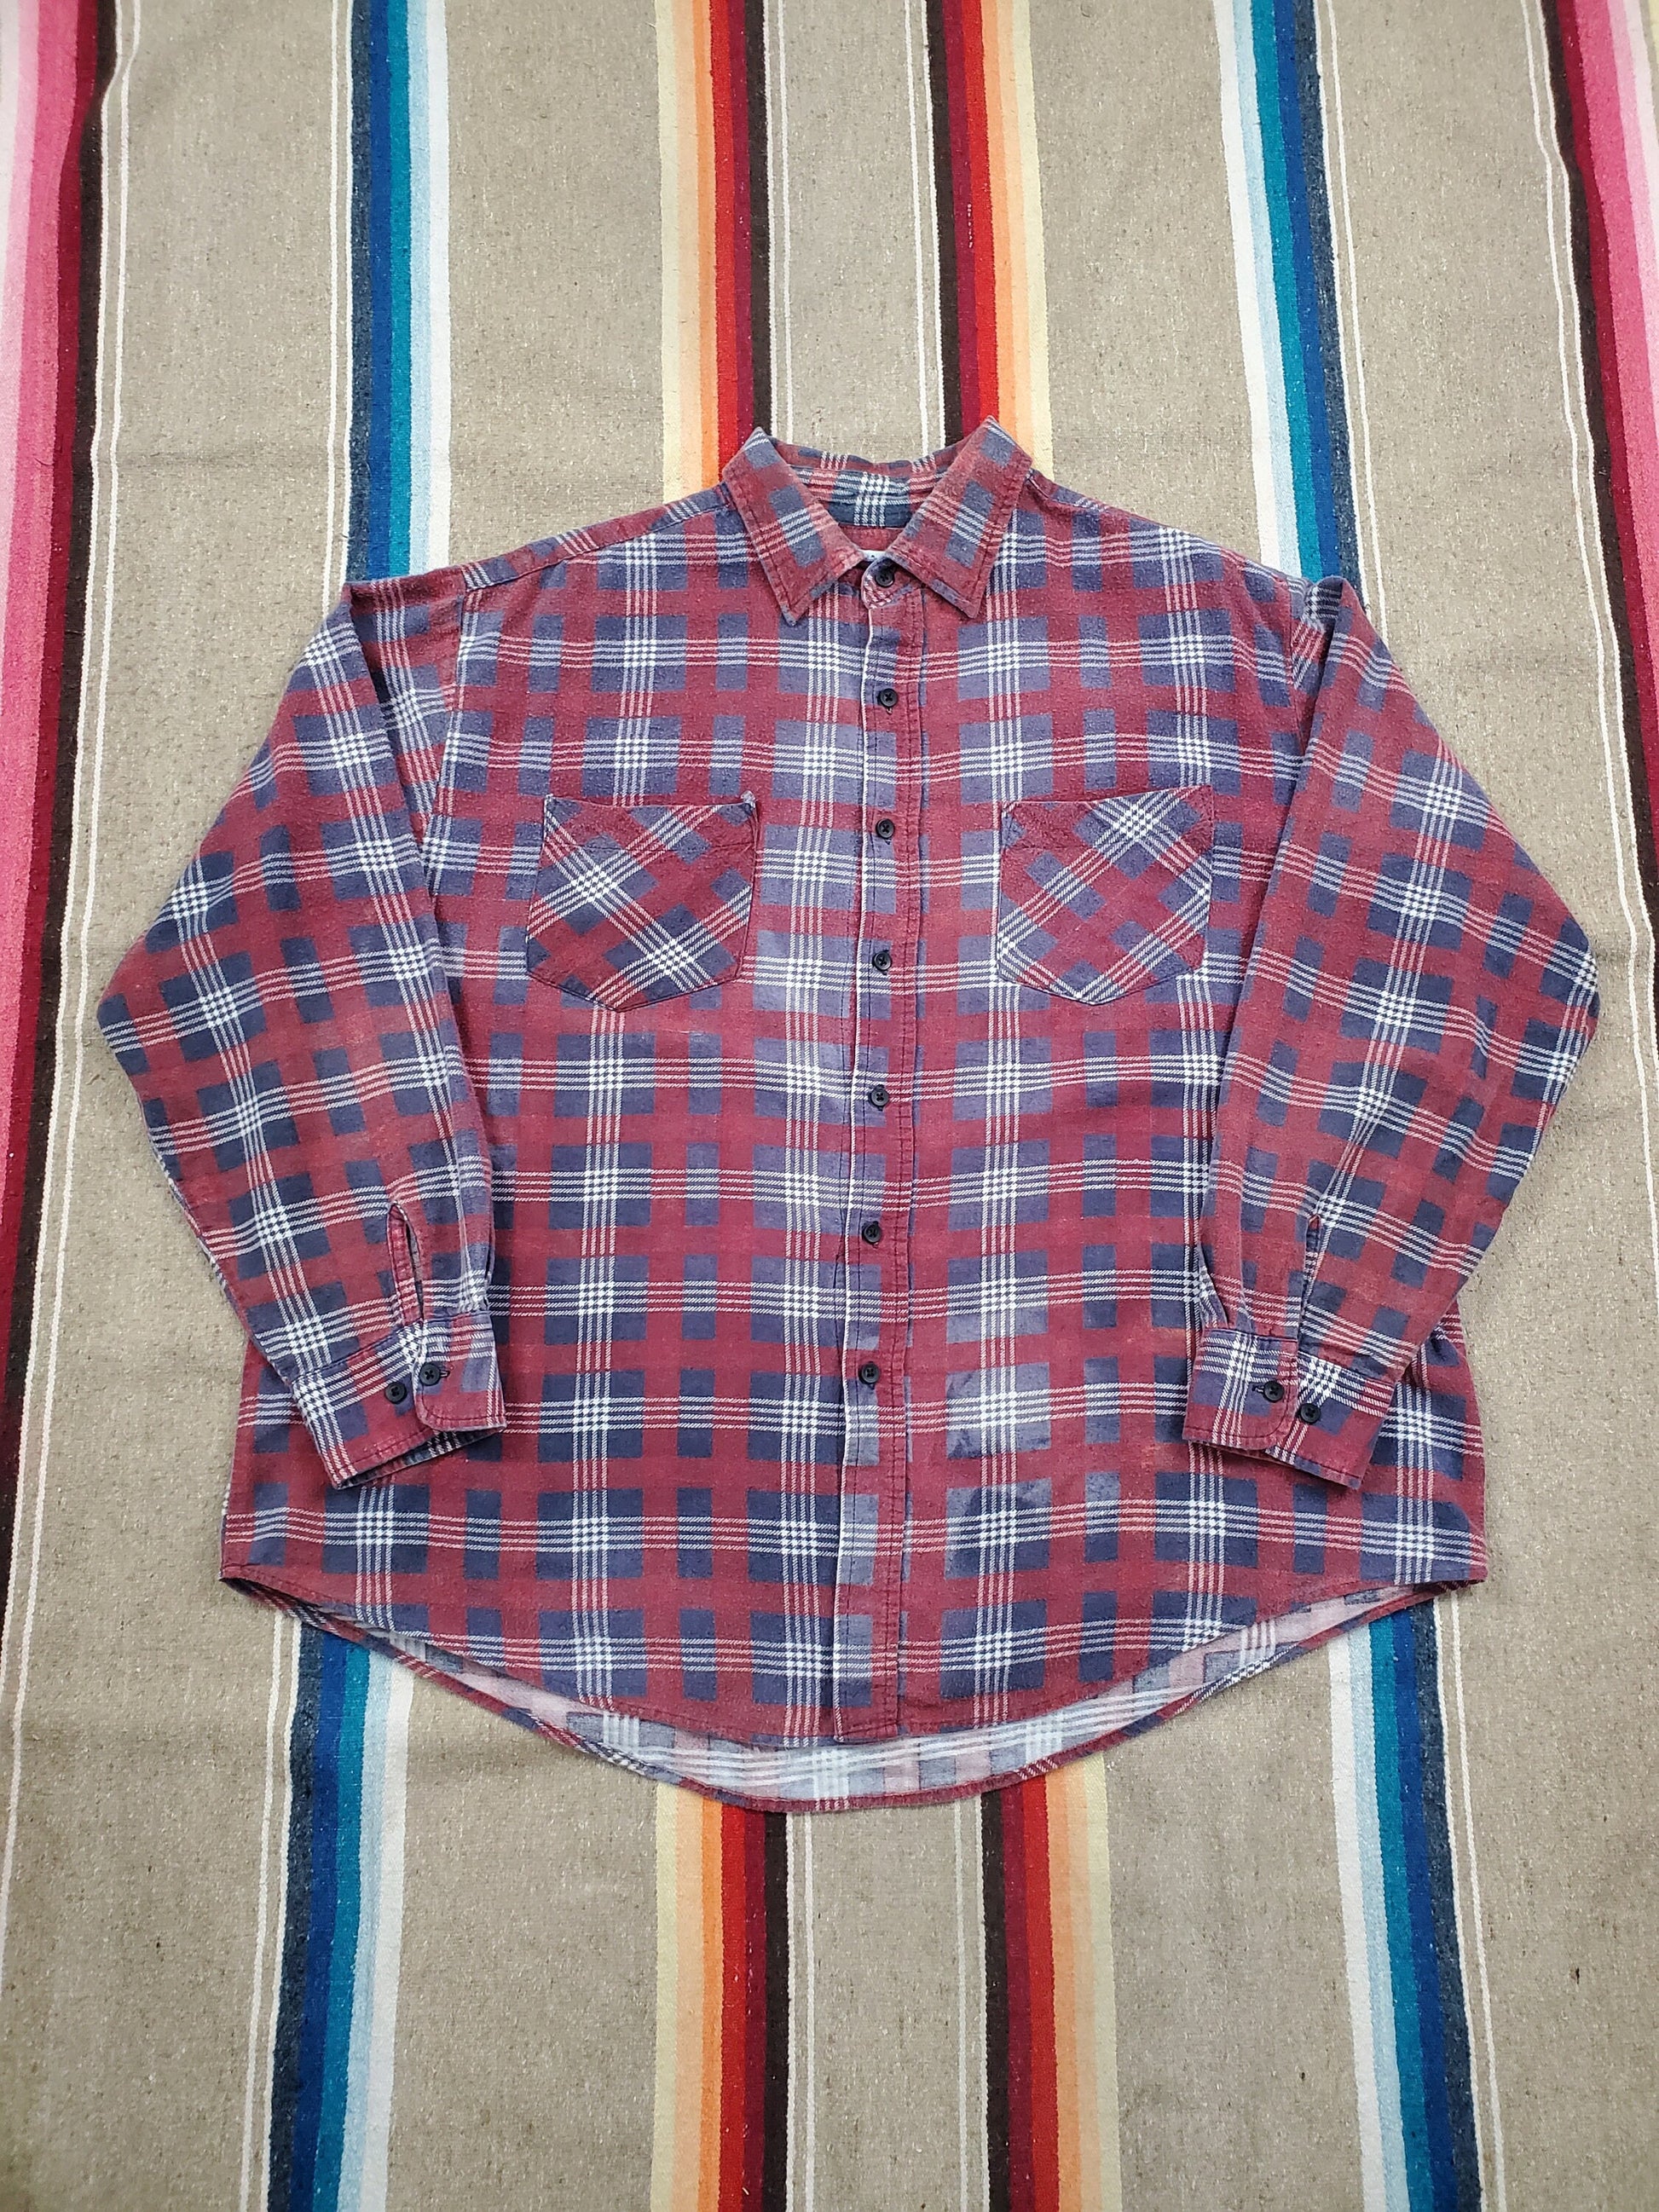 1990s Basic Editions Faded Printed Cotton Flannel Shirt Size XL/XXL